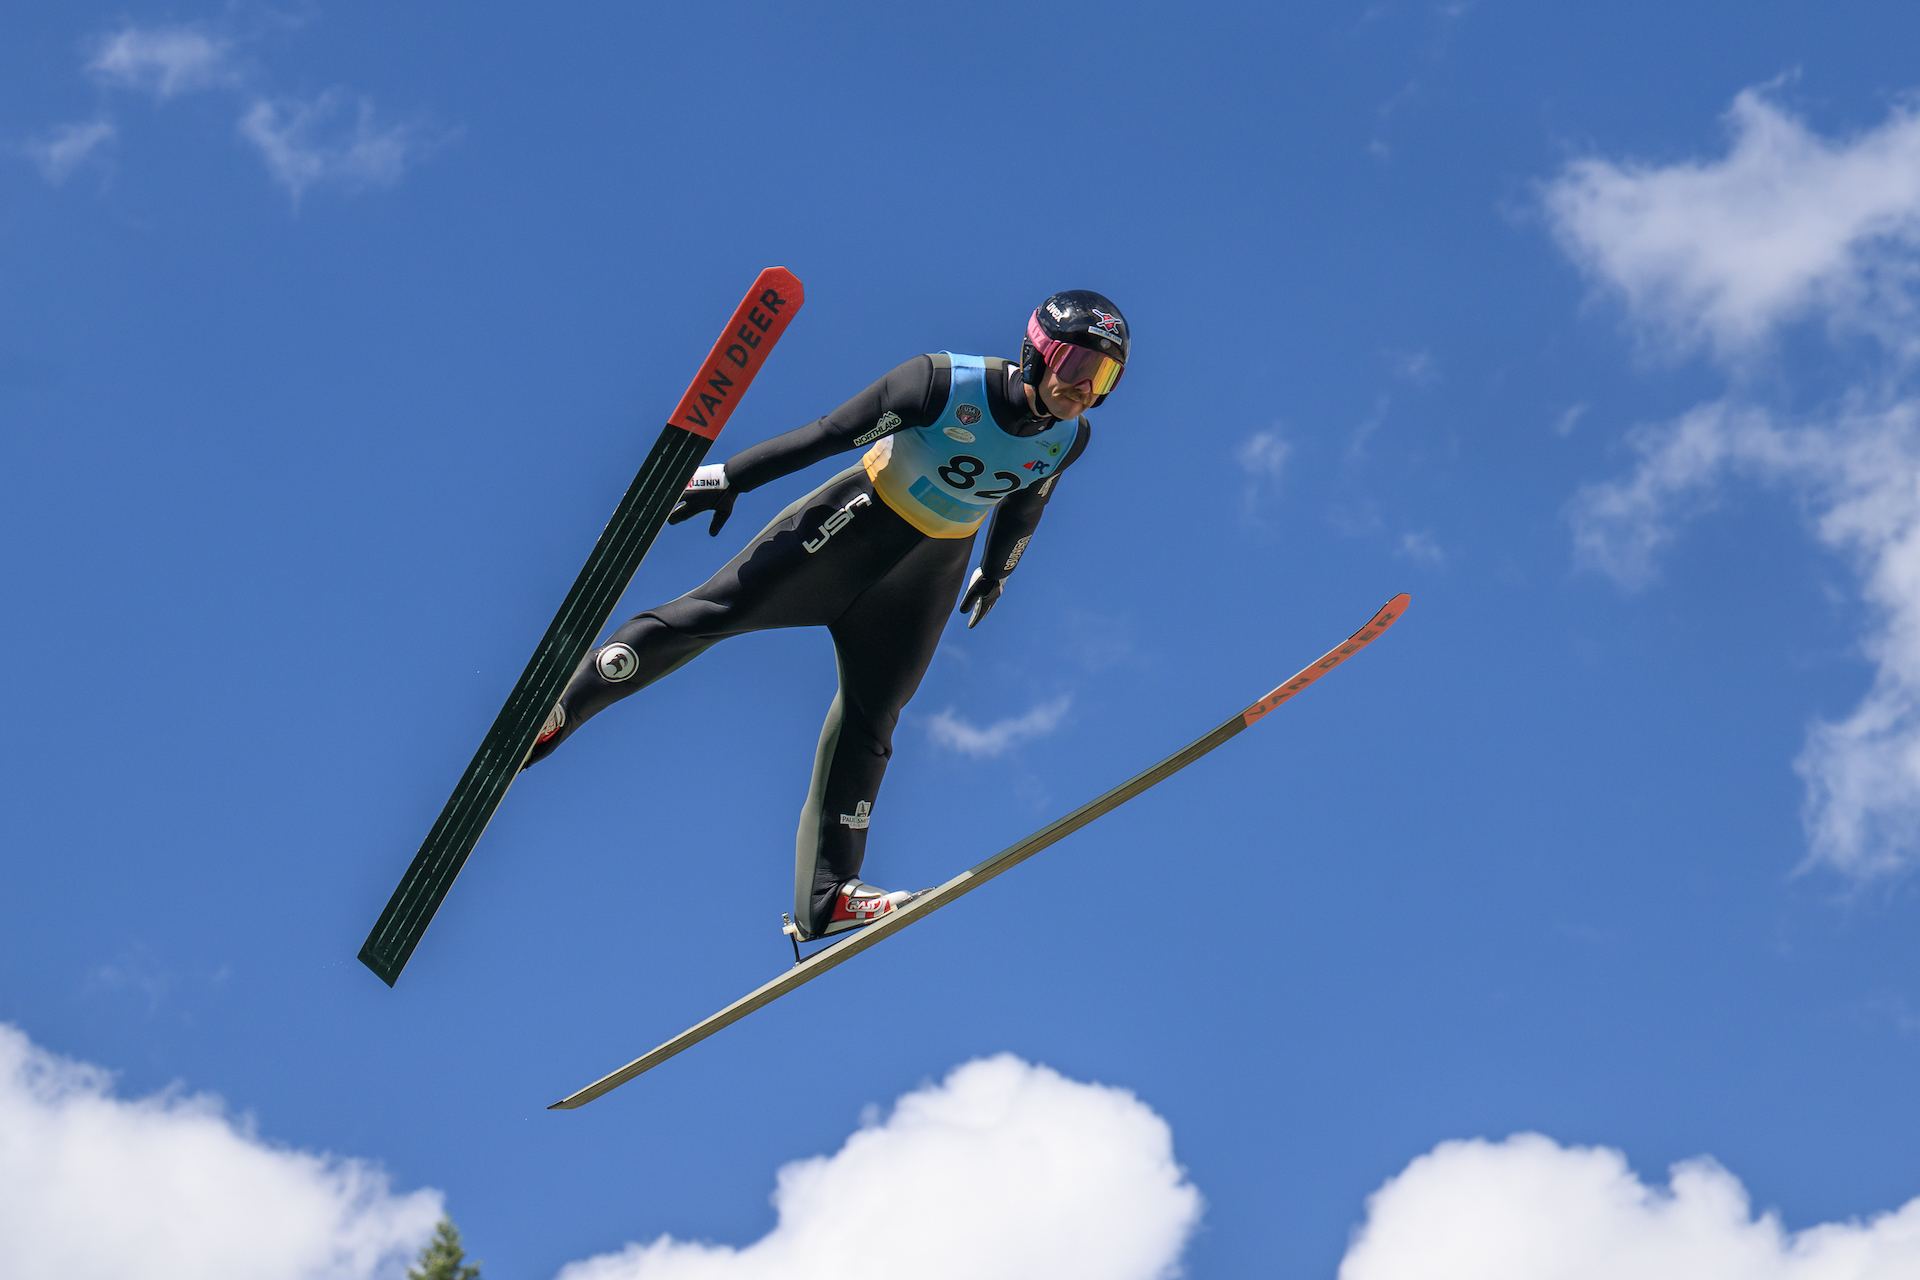 USA Nordic Sport Ski Jumping and Nordic Combined Sport Development